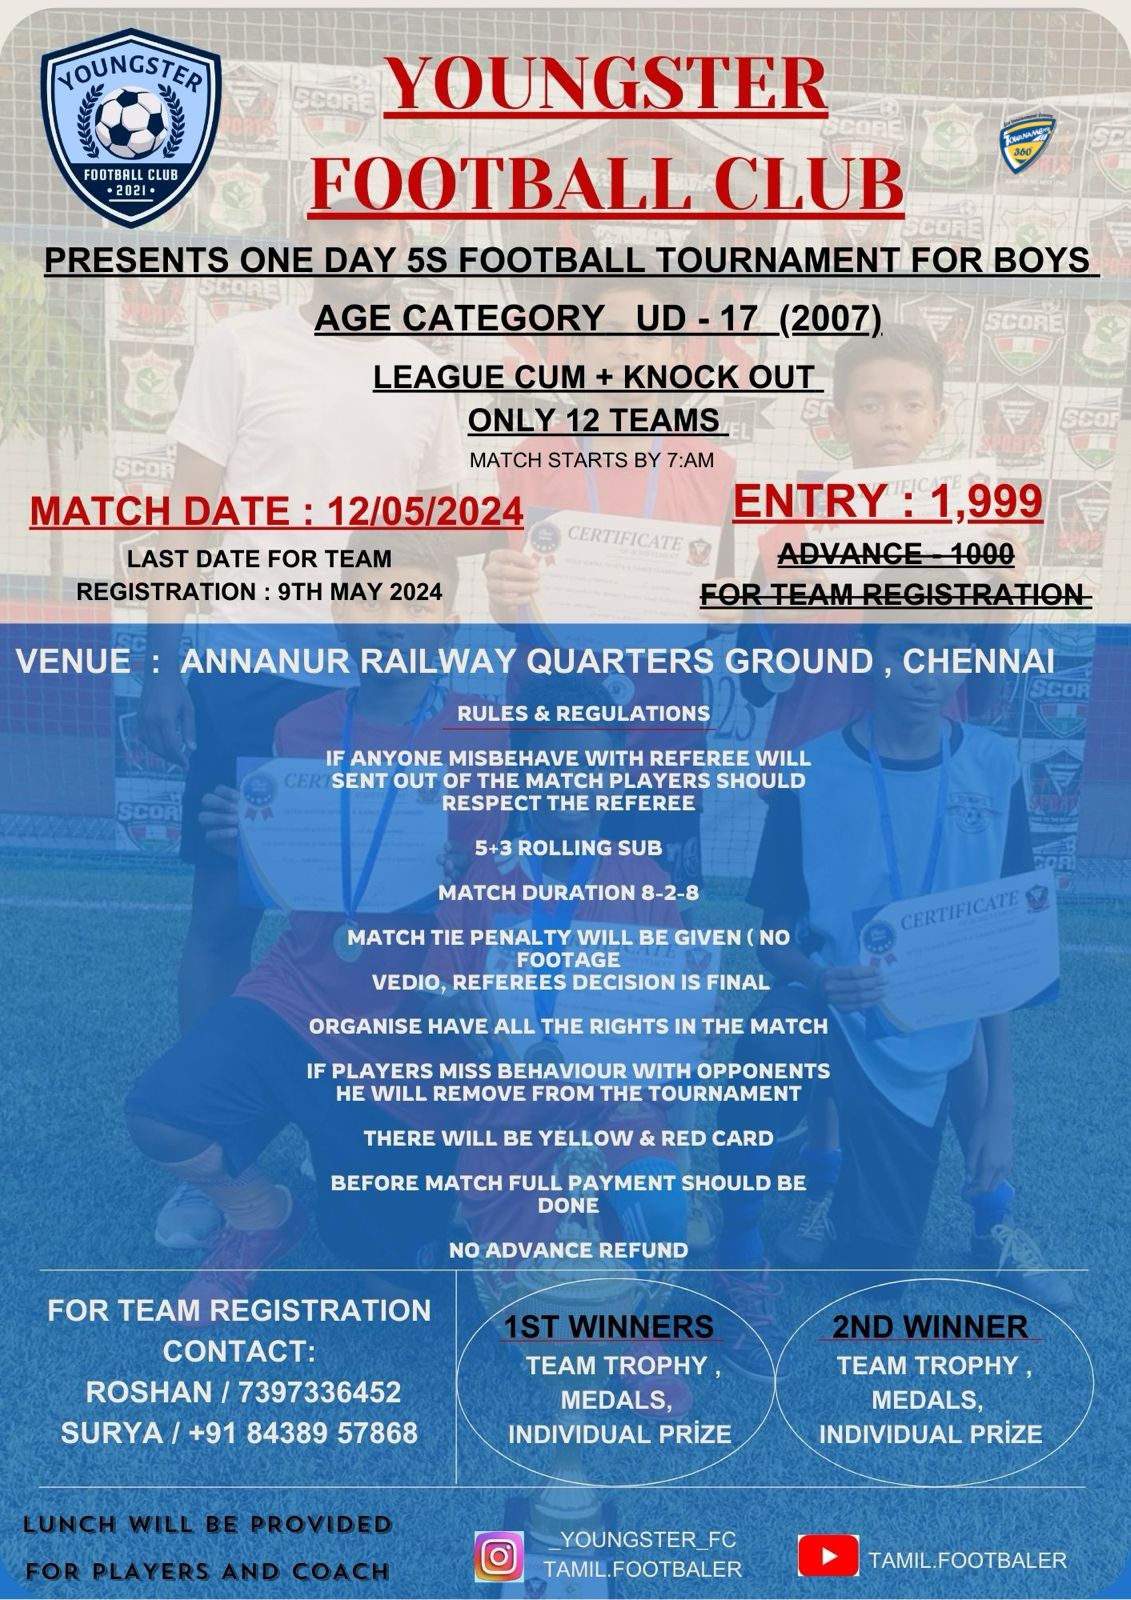 Under 17 One Day 5s Football Tournament for Boys